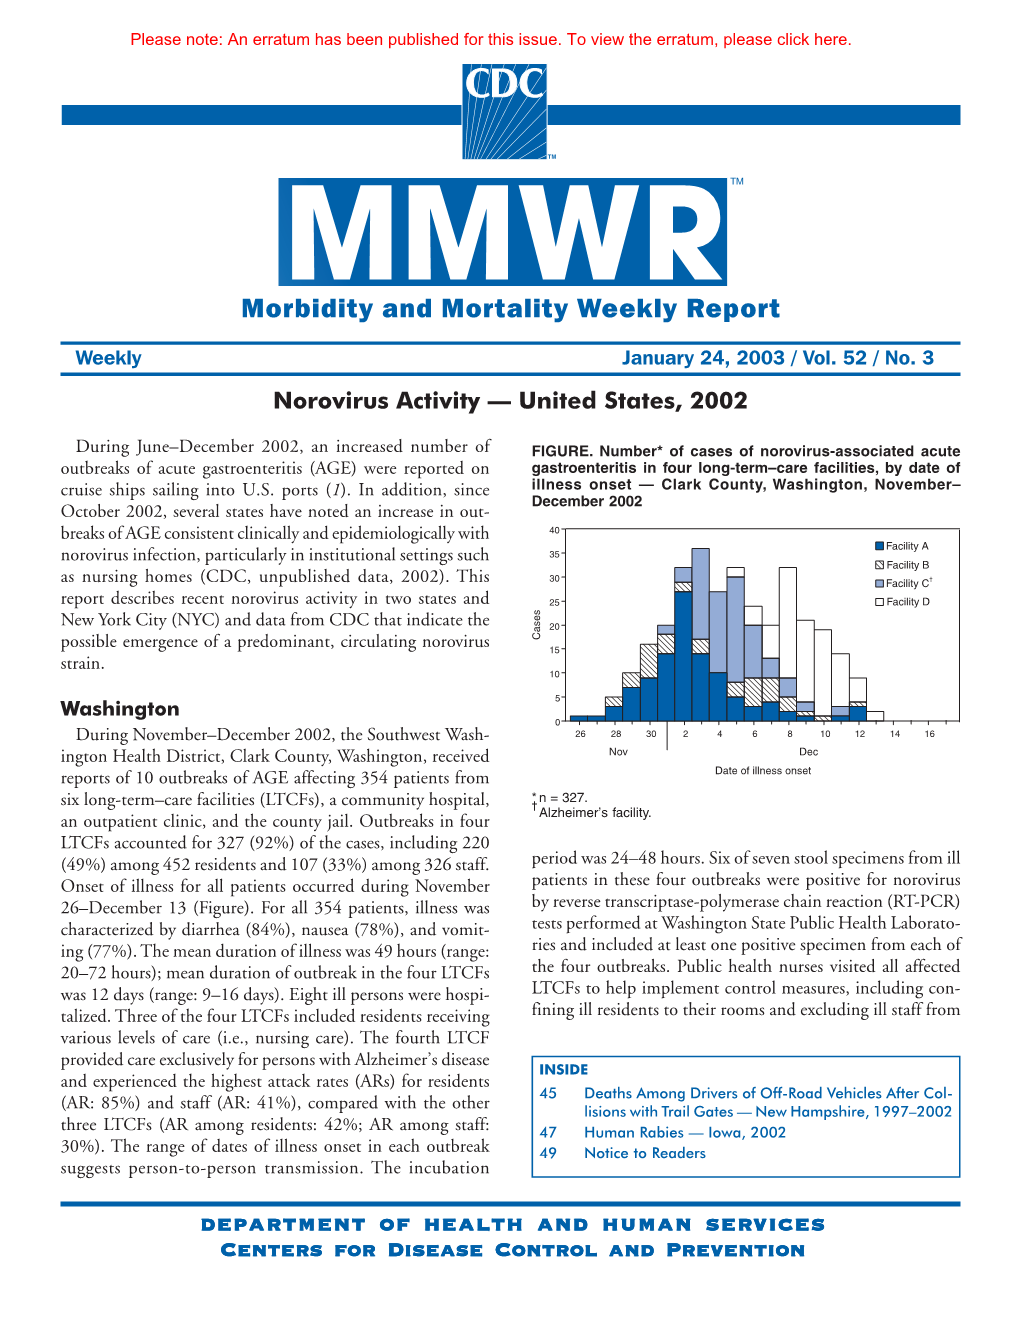 Morbidity and Mortality Weekly Report